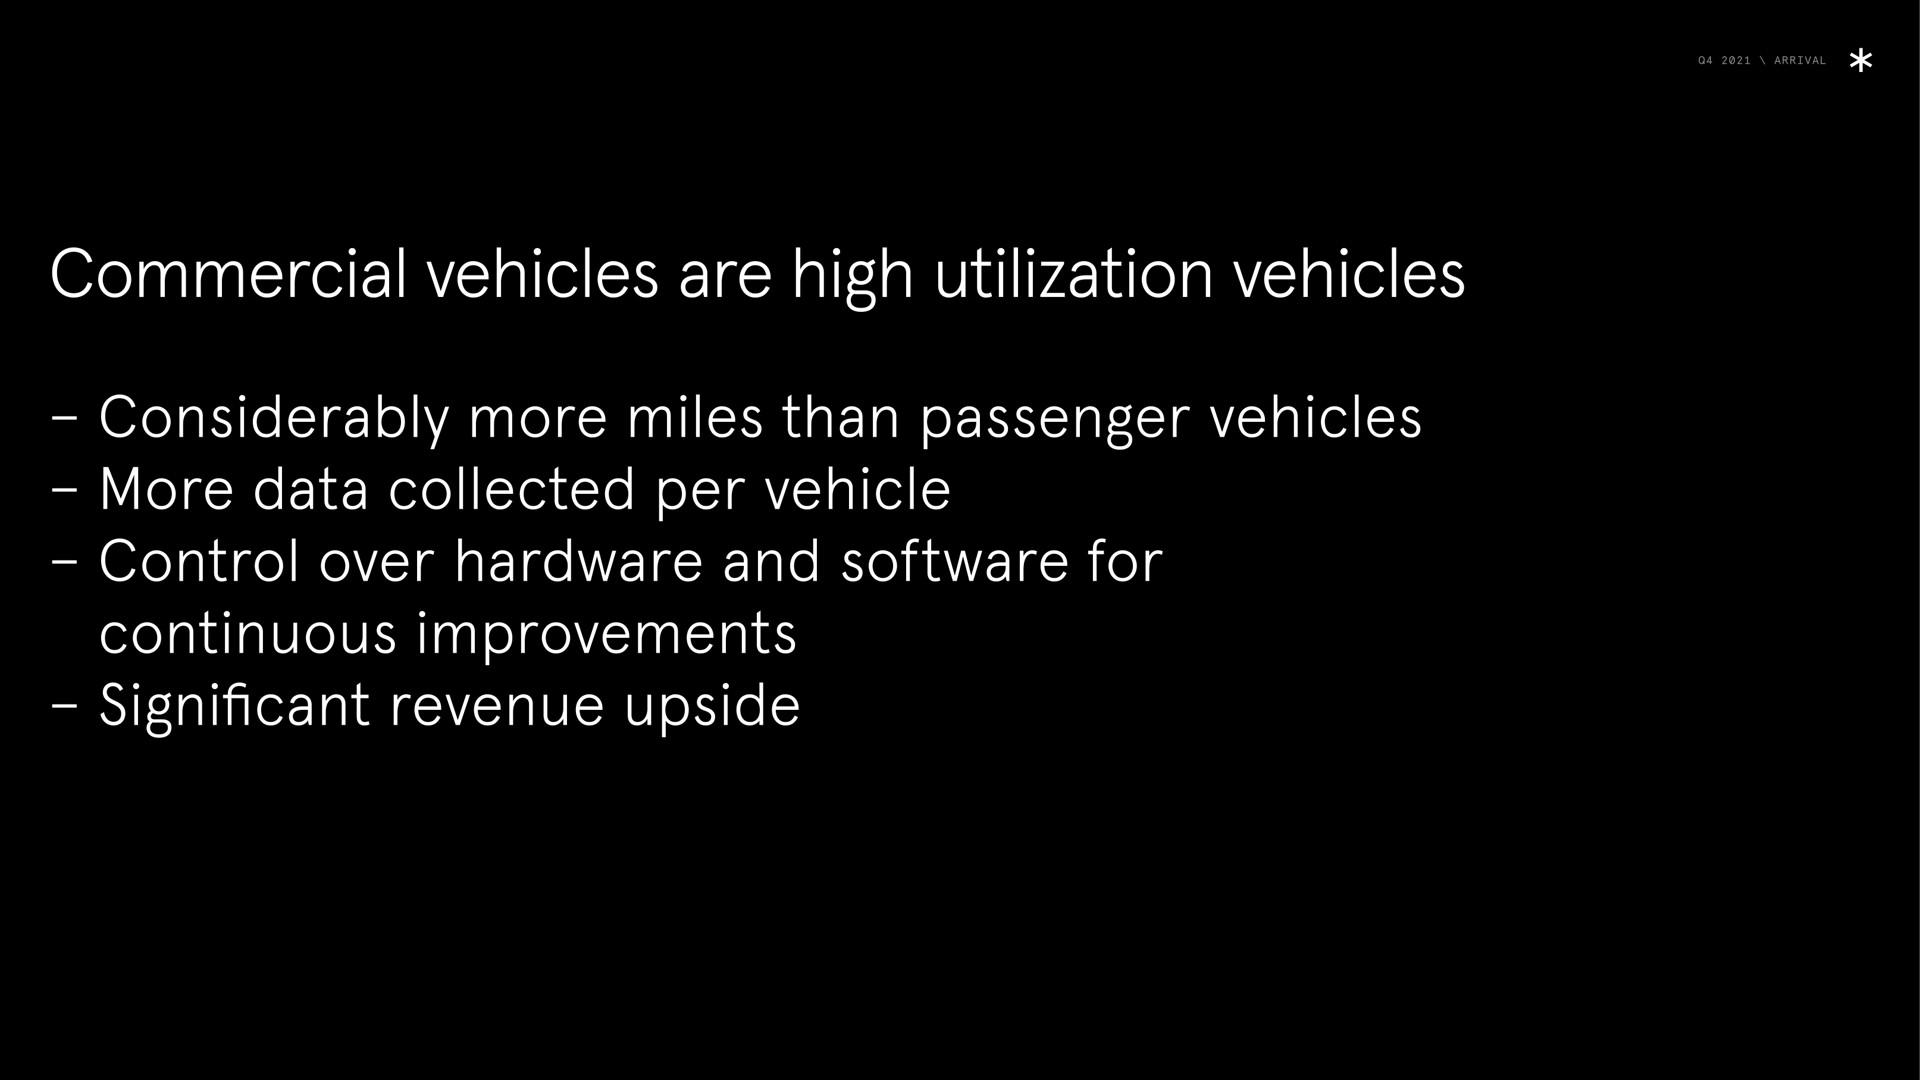 arrival commercial vehicles are high utilization vehicles considerably more miles than passenger vehicles more data collected per vehicle control over hardware and for continuous improvements significant revenue upside | Arrival